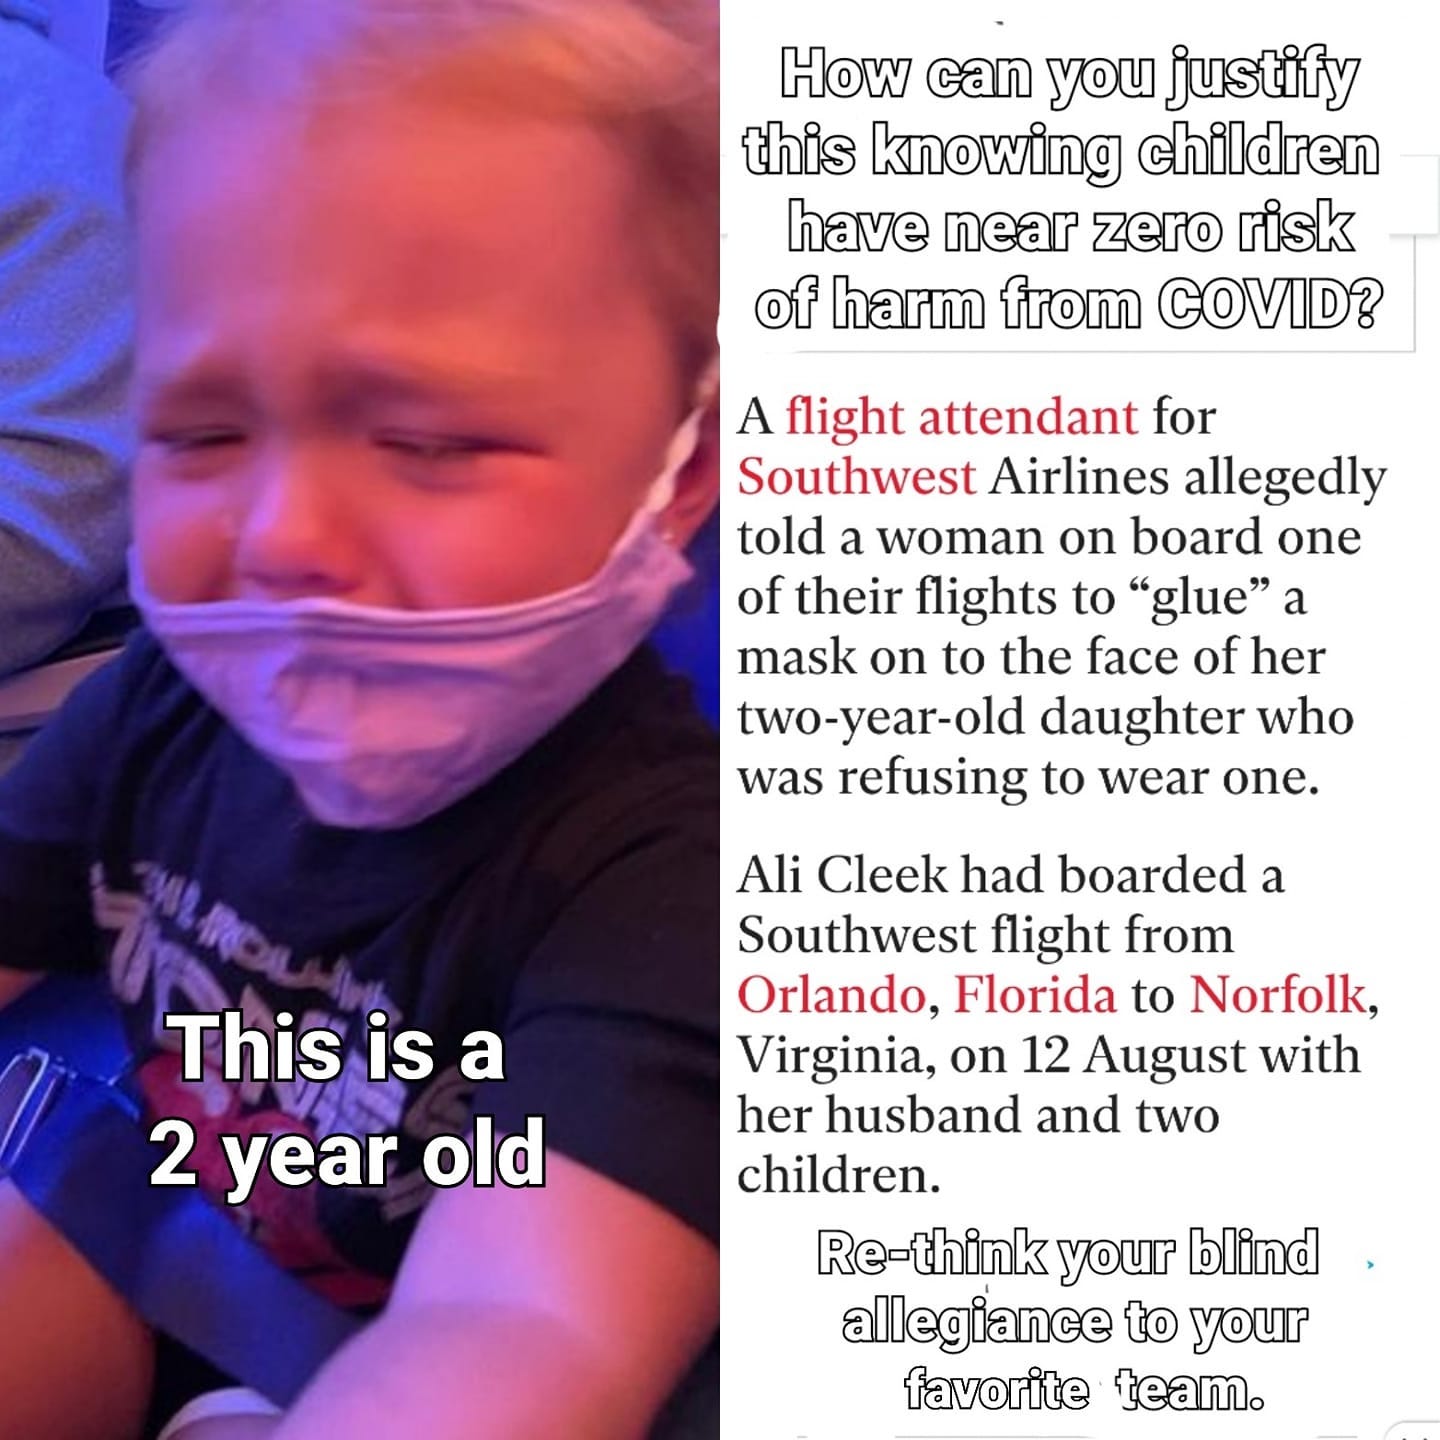 May be an image of child and text that says 'How can you justify this knowing children have near zero risk of harm from COVID? A flight attendant for Southwest Airlines allegedly told a woman on board one of their flights to "glue" a mask on to the face of her two-year-old daughter who was refusing to wear one. This is a 2 year old Ali Cleek had boarded a Southwest flight from Orlando, Florida to Norfolk, Virginia, on 12 August with her husband and two children. Re-think your blind allegiance to your favorite team.'